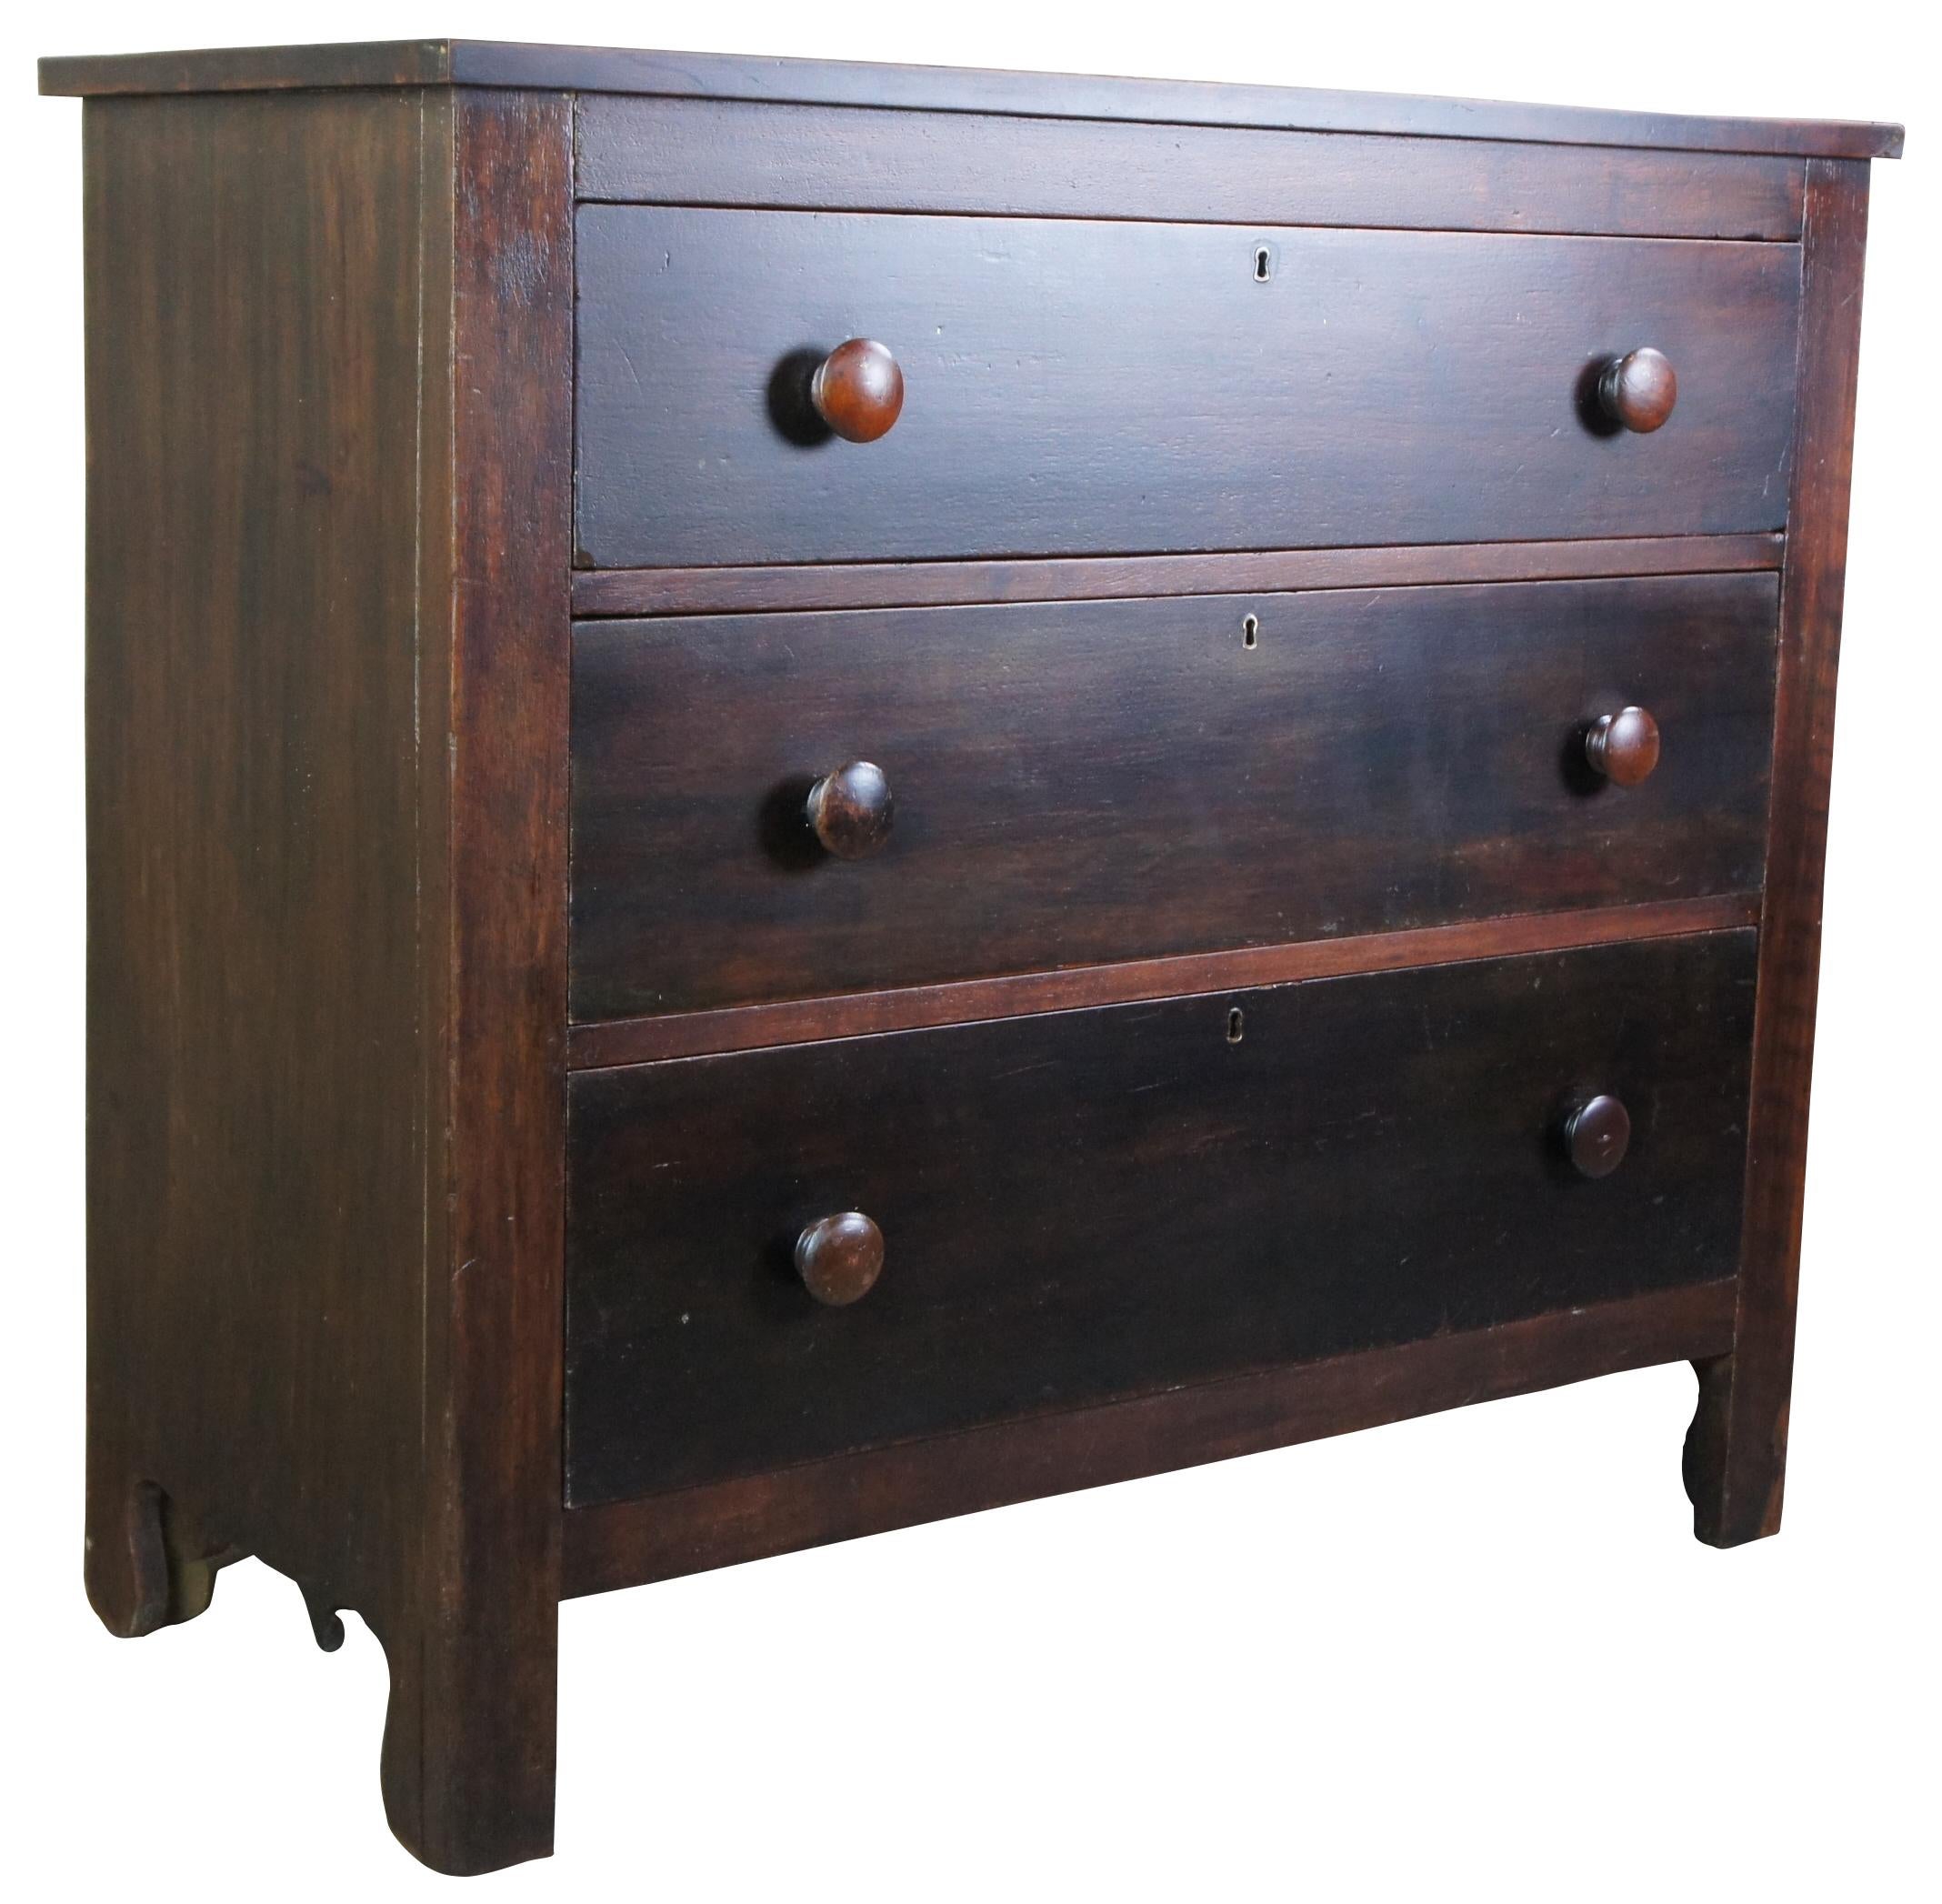 Antique 19th century chest of drawers or dresser. Made of walnut featuring three large hand dovetailed drawers with turned knobs and brass keyholes. Measure: 40